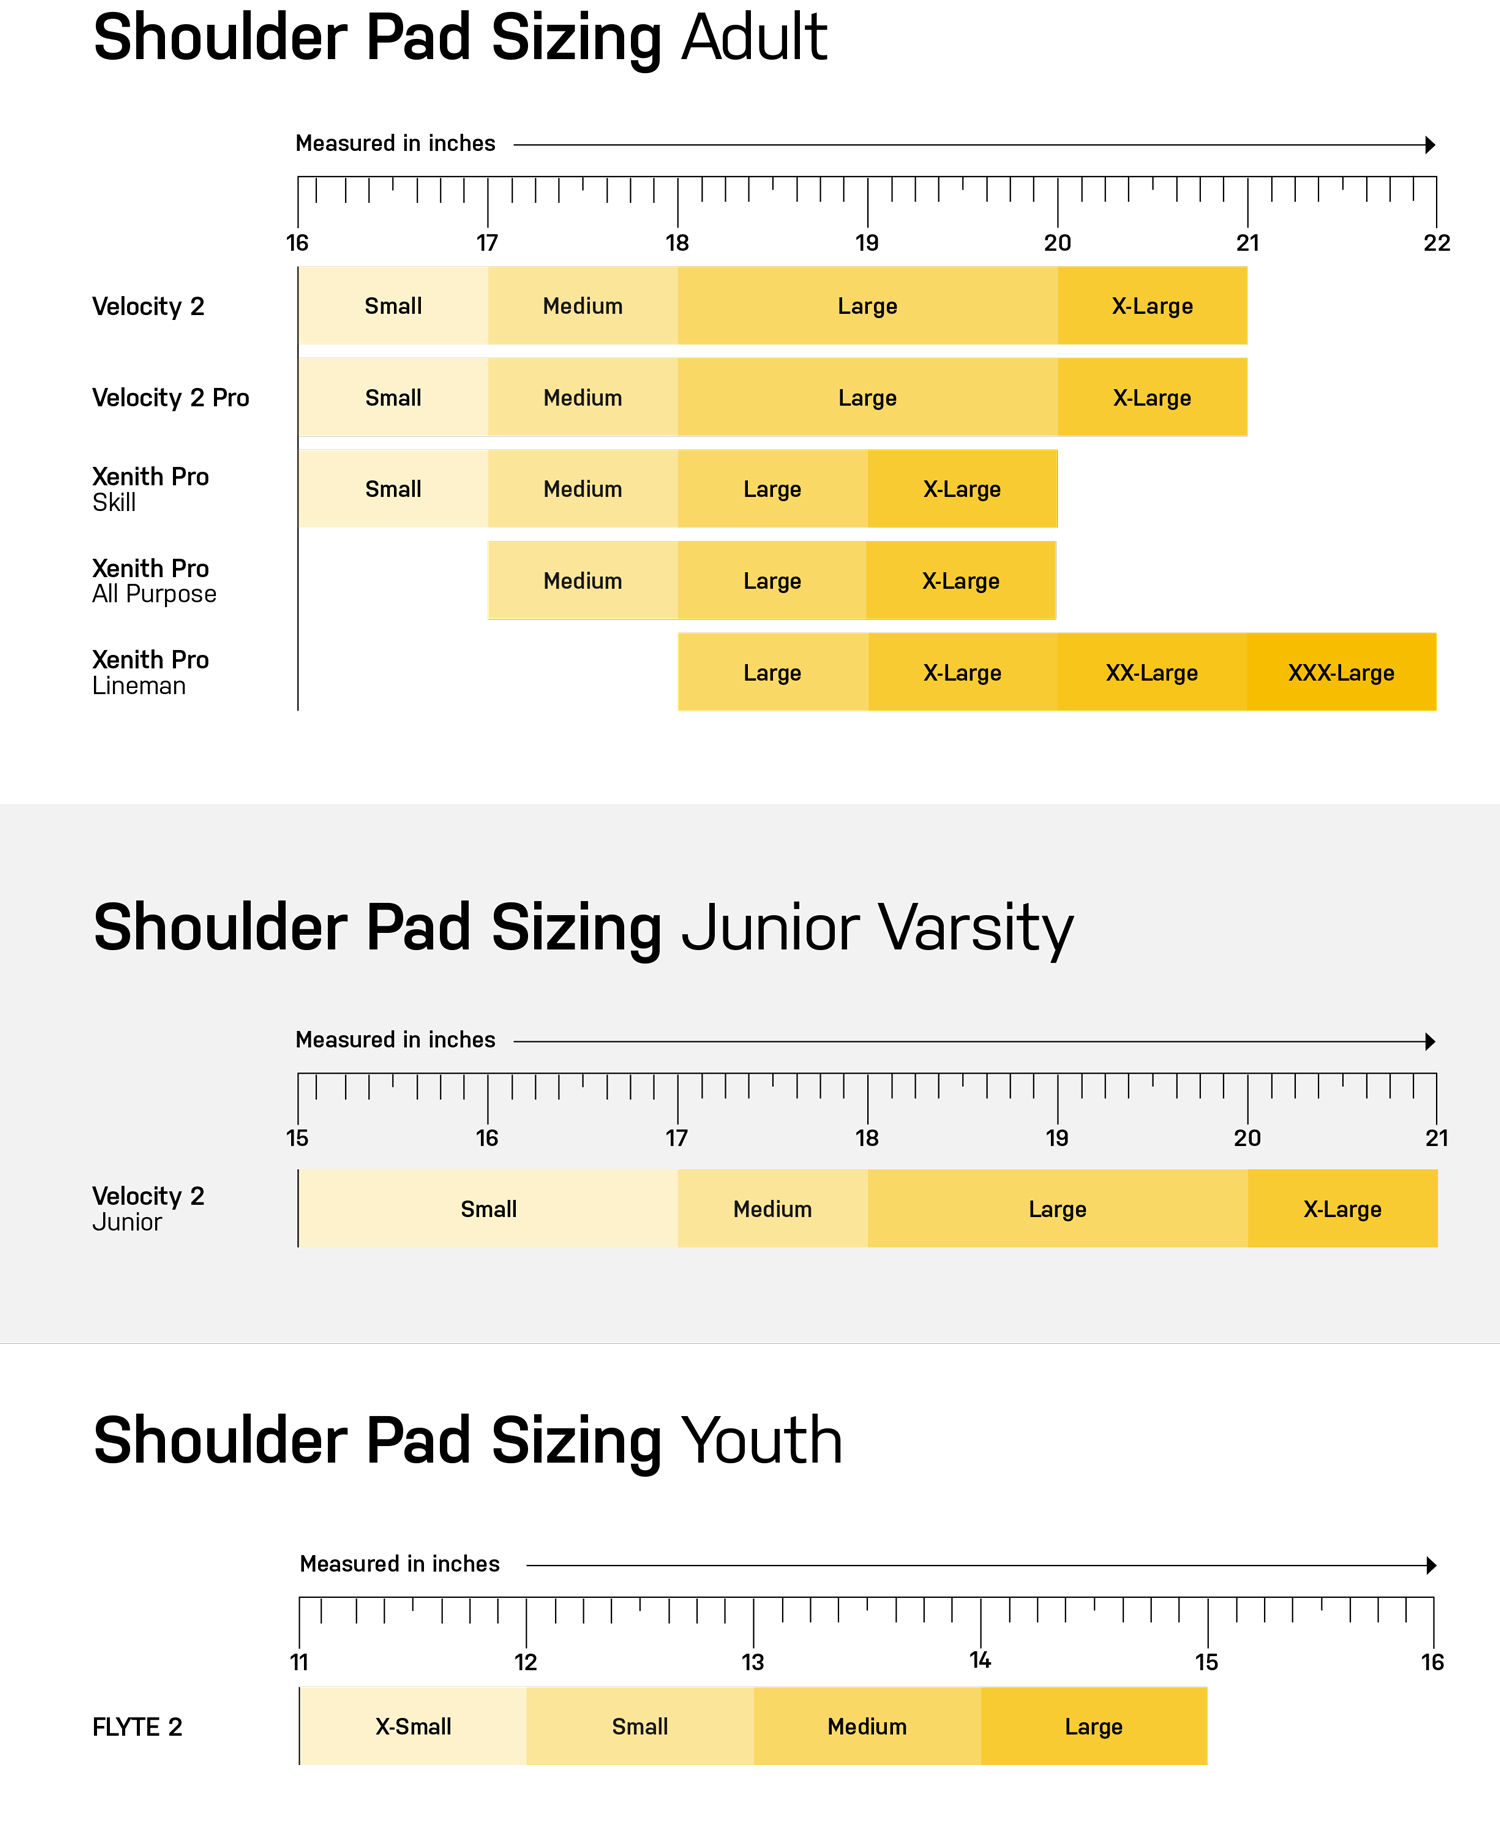 Xenith Shoulder Pads sizing chart. Click this link for a text based helmet chart https://xenith.com/documents/Hosting/Shoulder-Pad-Sizing-Charts-Sheet1.pdf